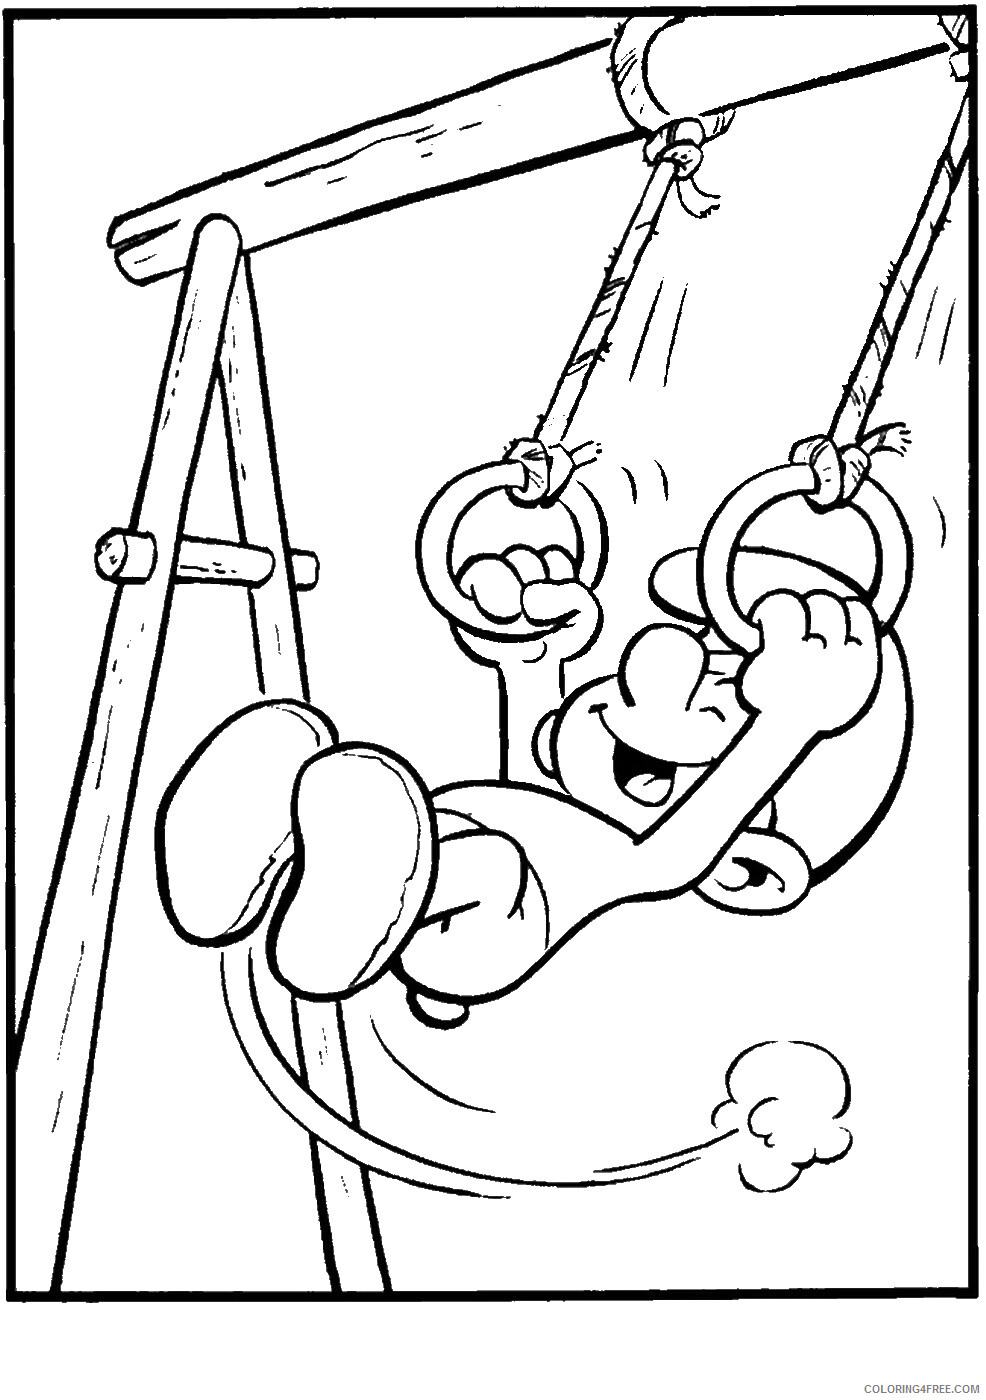 The Smurfs Coloring Pages TV Film smurfs_48 Printable 2020 09745 Coloring4free